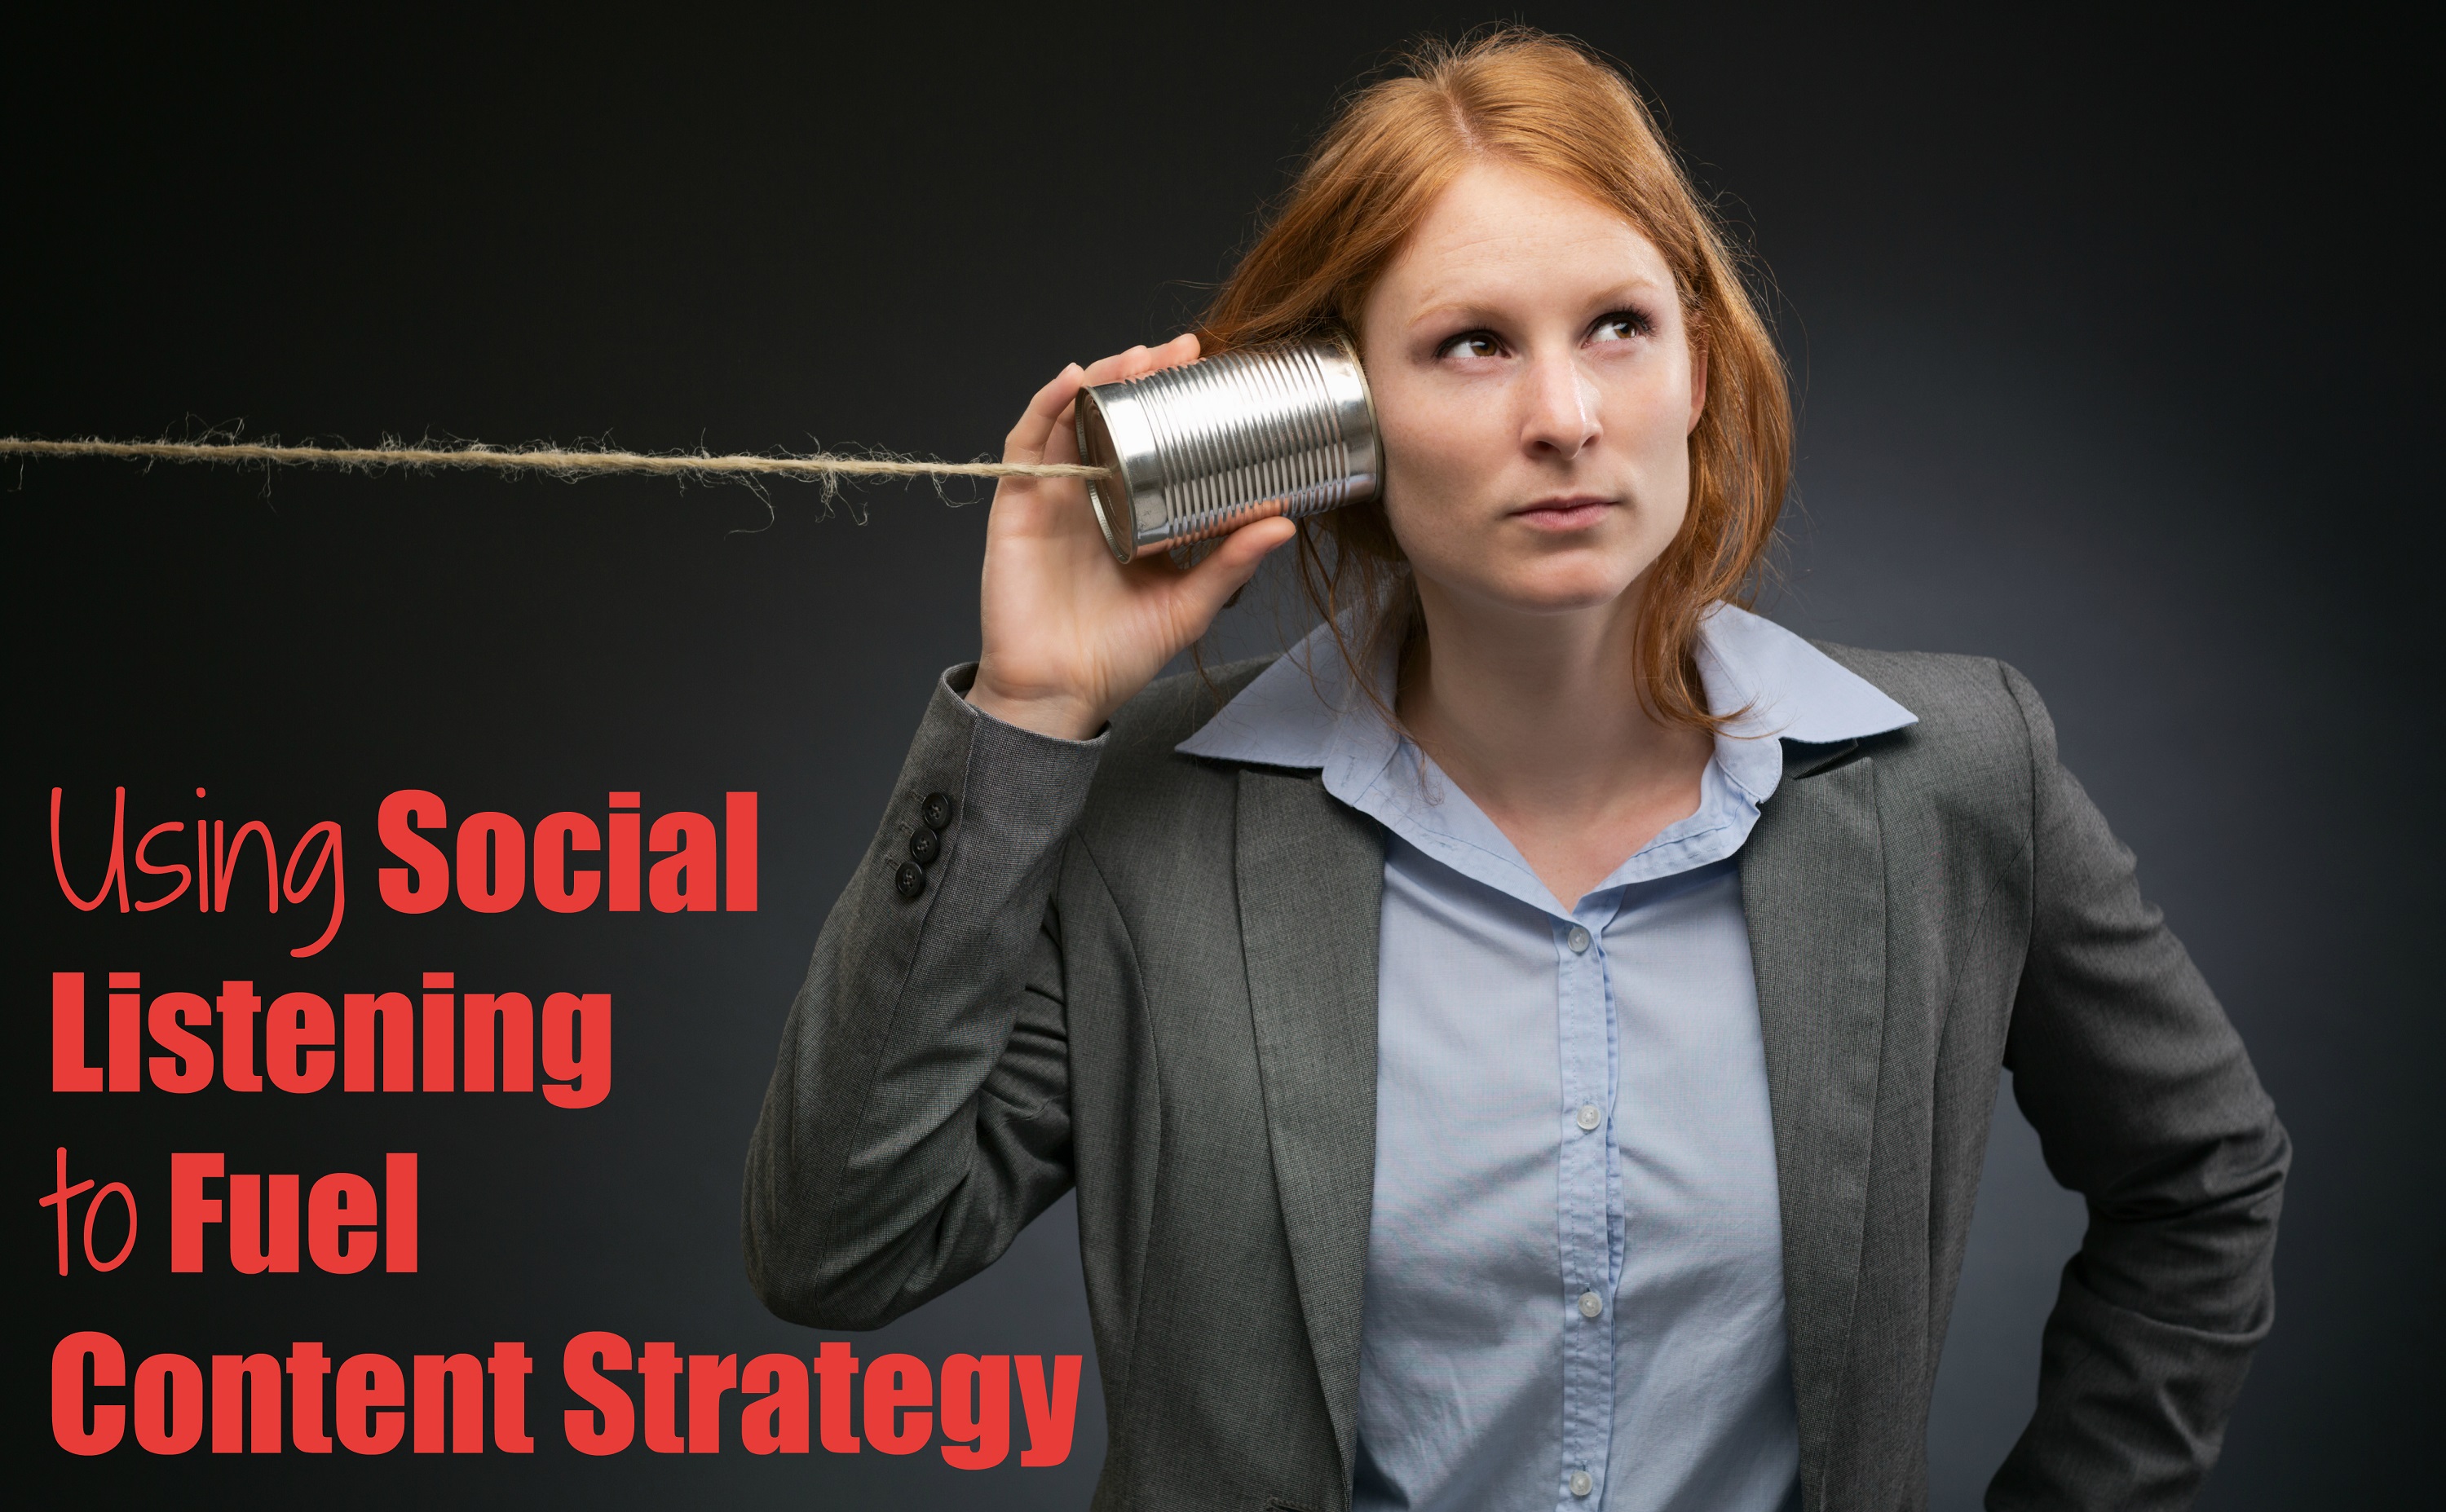 Using Social Listening to Fuel Content Strategy